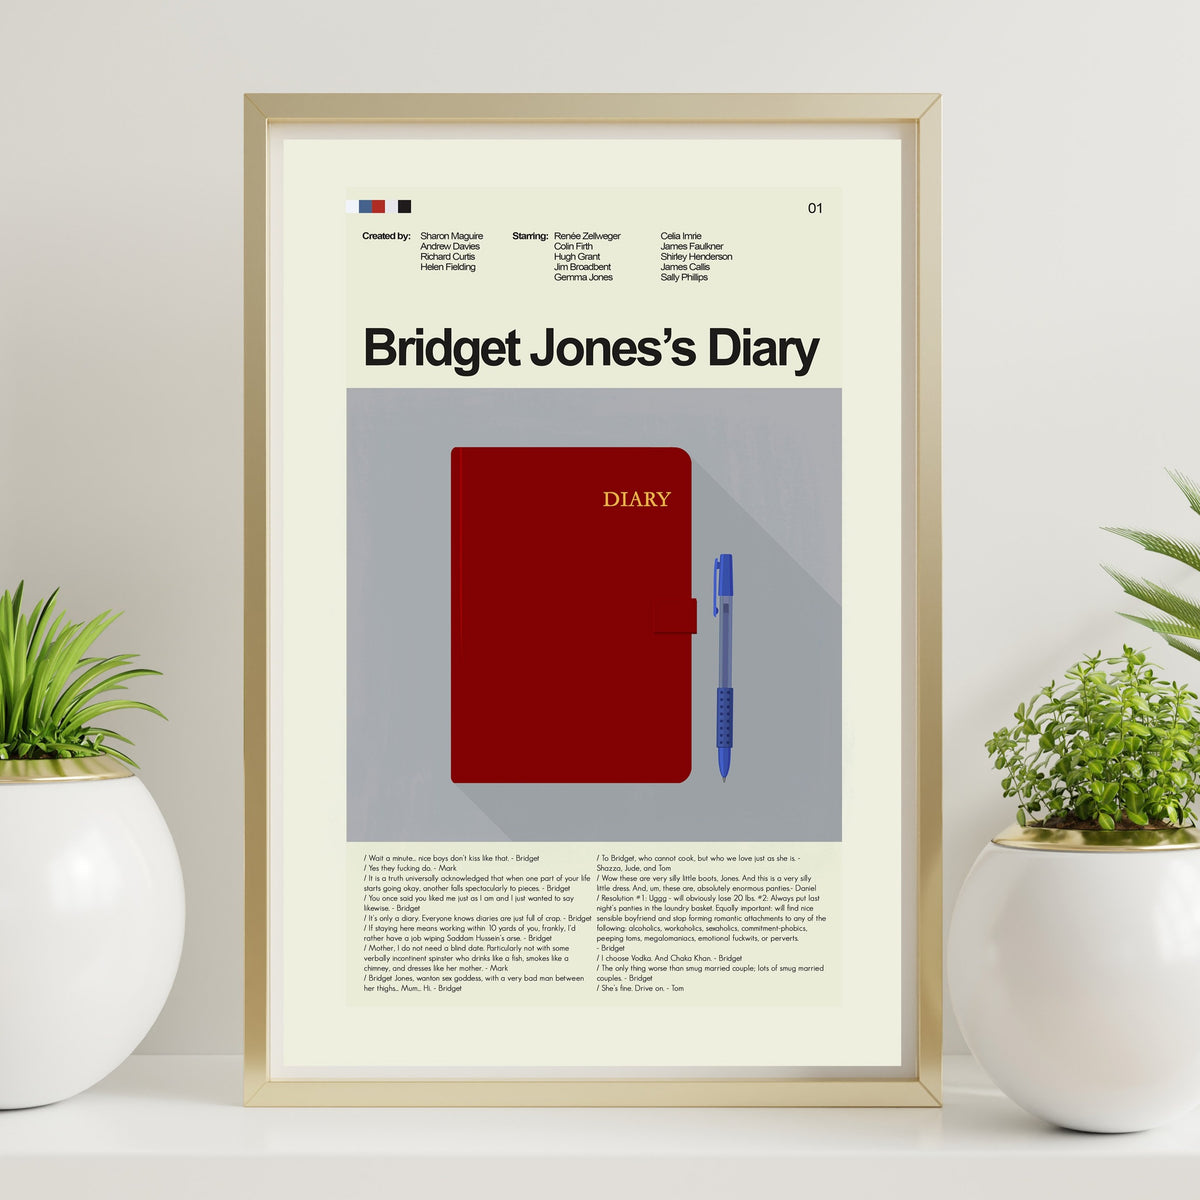 Bridget Jones's Diary - Red Diary with Blue Pen  | 12"x18" or 18"x24" Print only